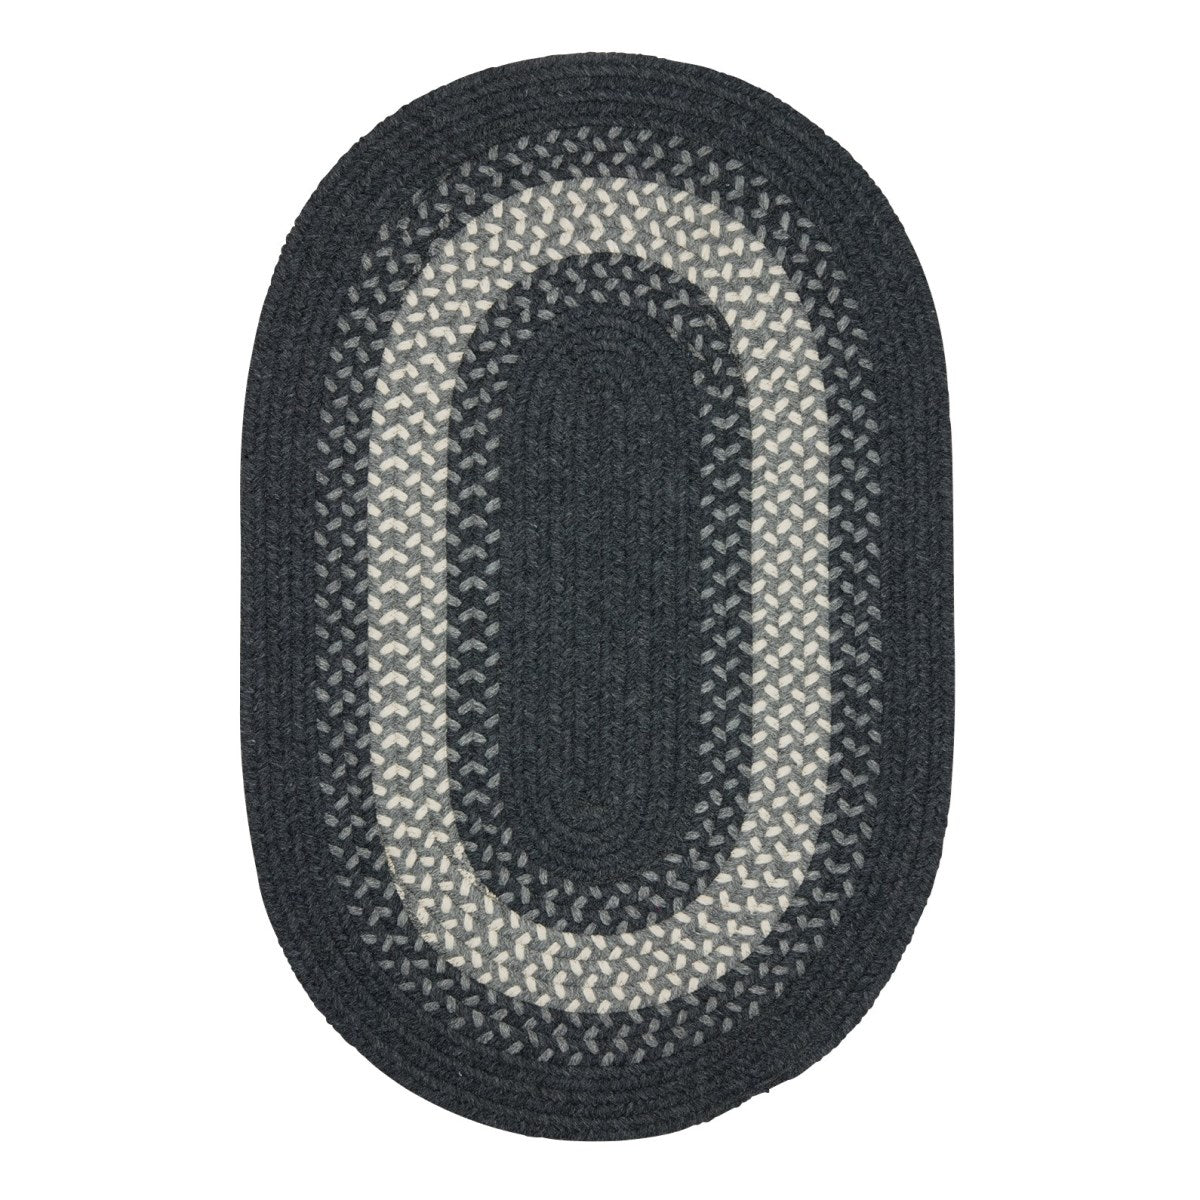 North Ridge Charcoal Outdoor Braided Oval Rugs